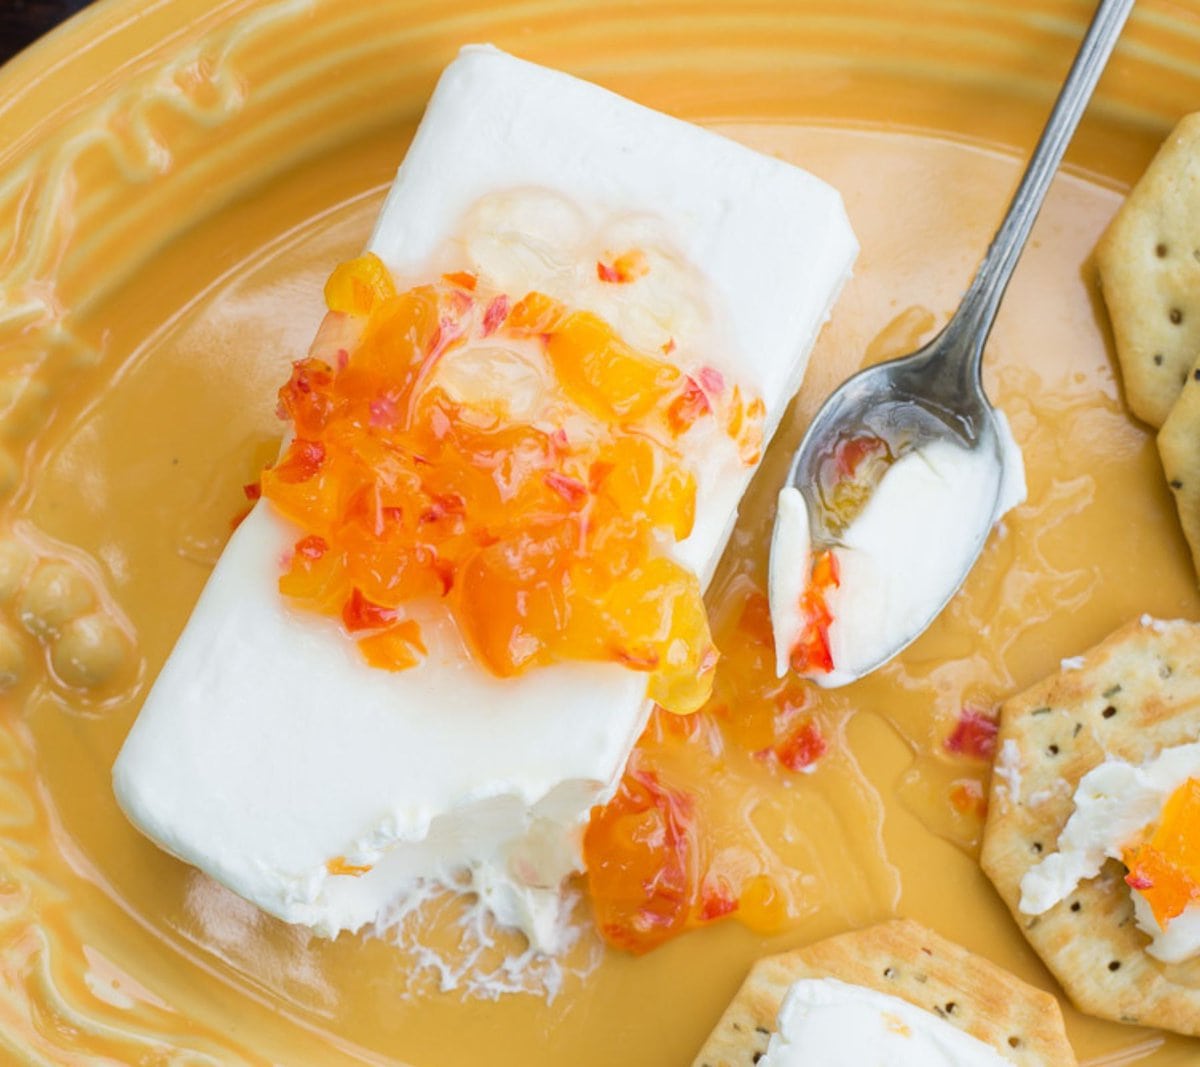 Habanero Jelly poured over a block of cream cheese with crackers.